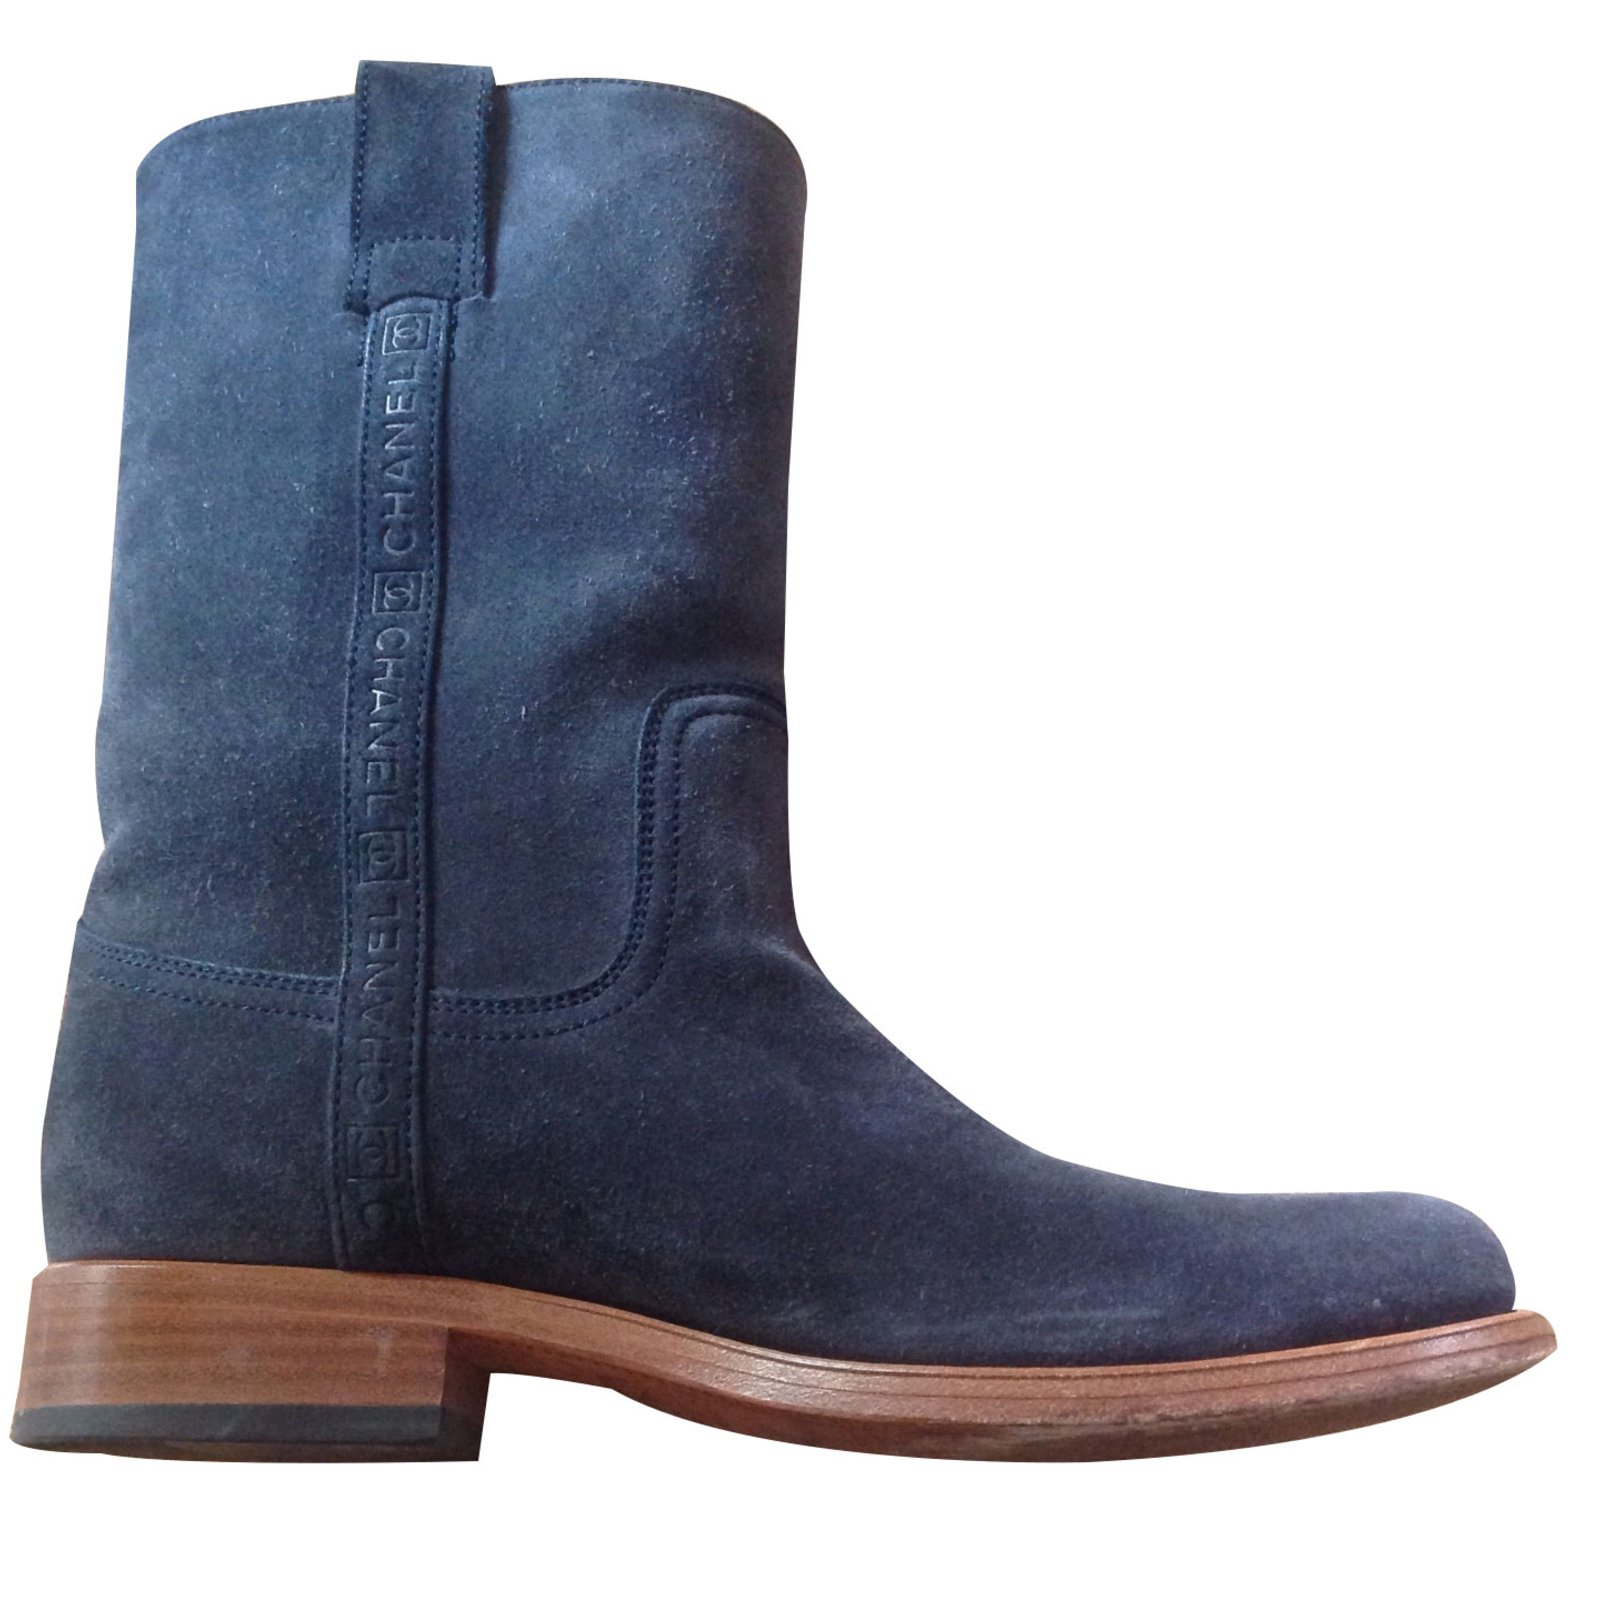 blue suede work boots